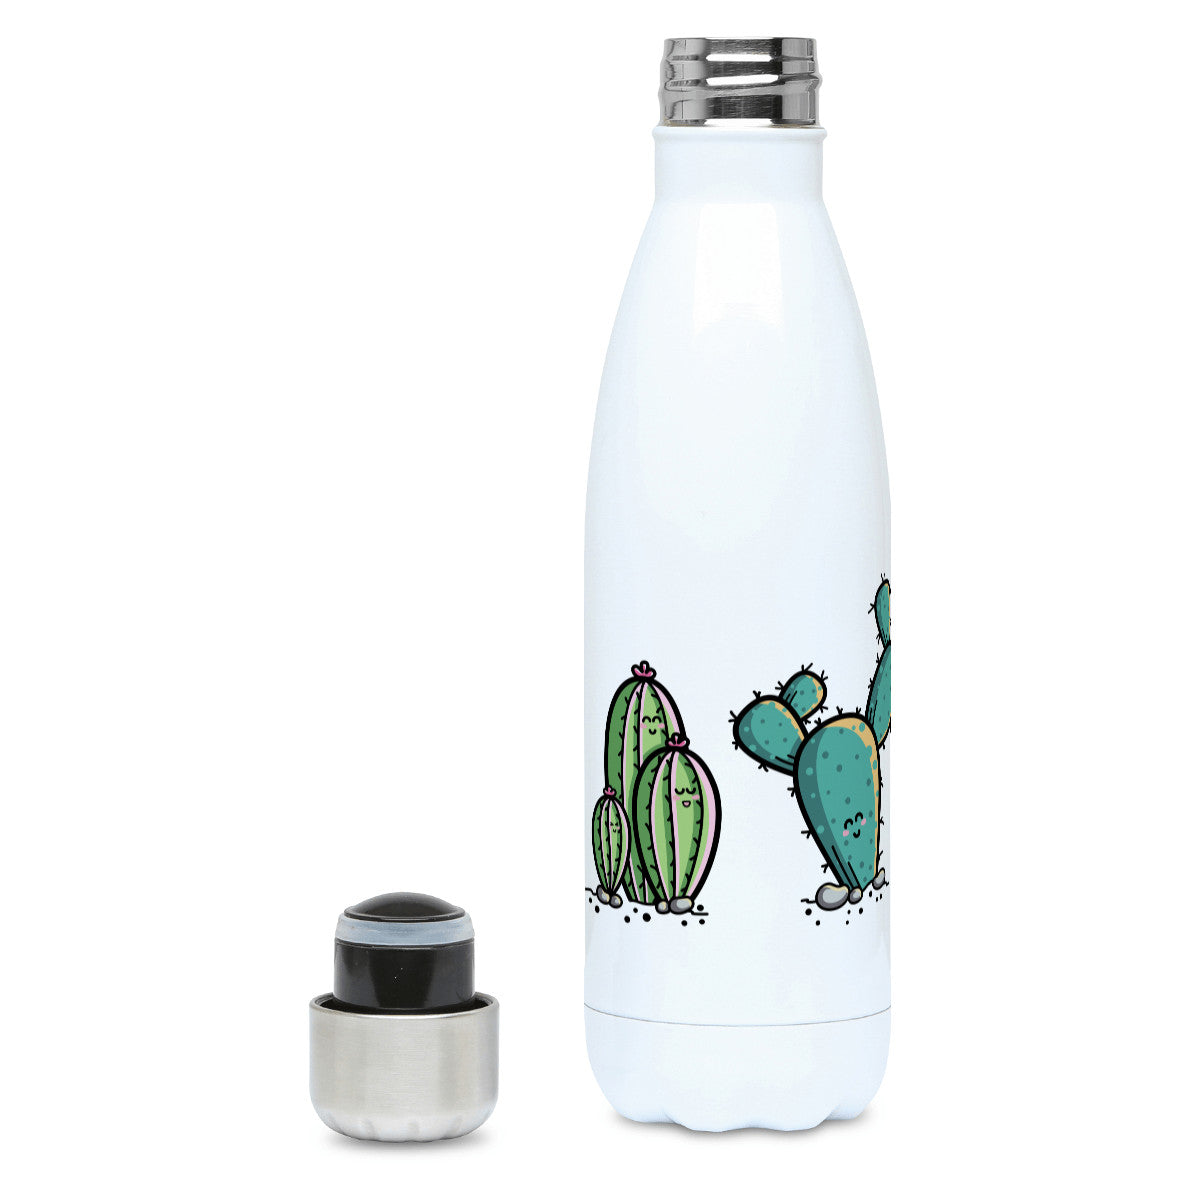 Four kawaii cute cactus plants design on a white metal insulated drinks bottle, lid off